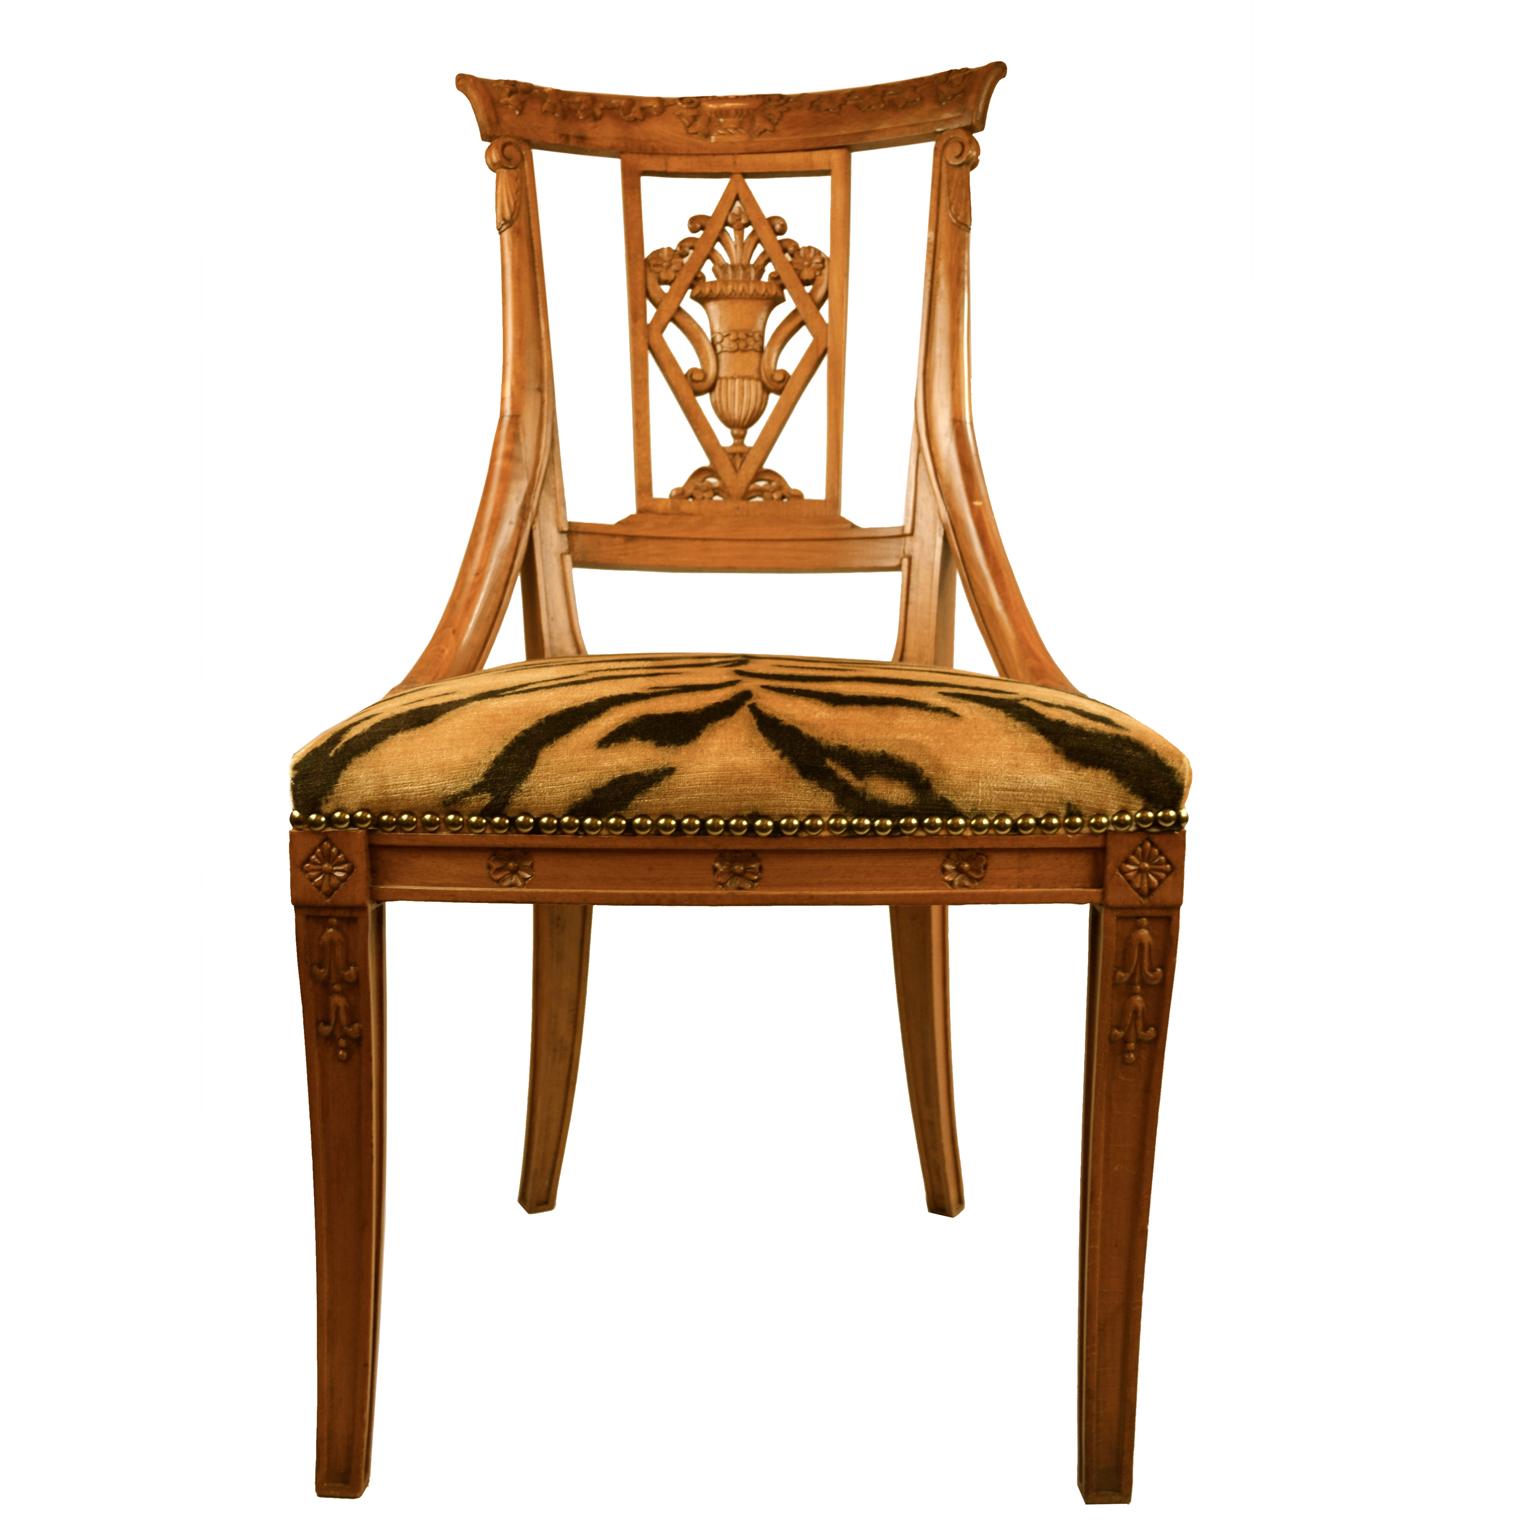 Fruitwood 19th Century Neoclassical Swedish Chair Upholstered in Tiger Velvet